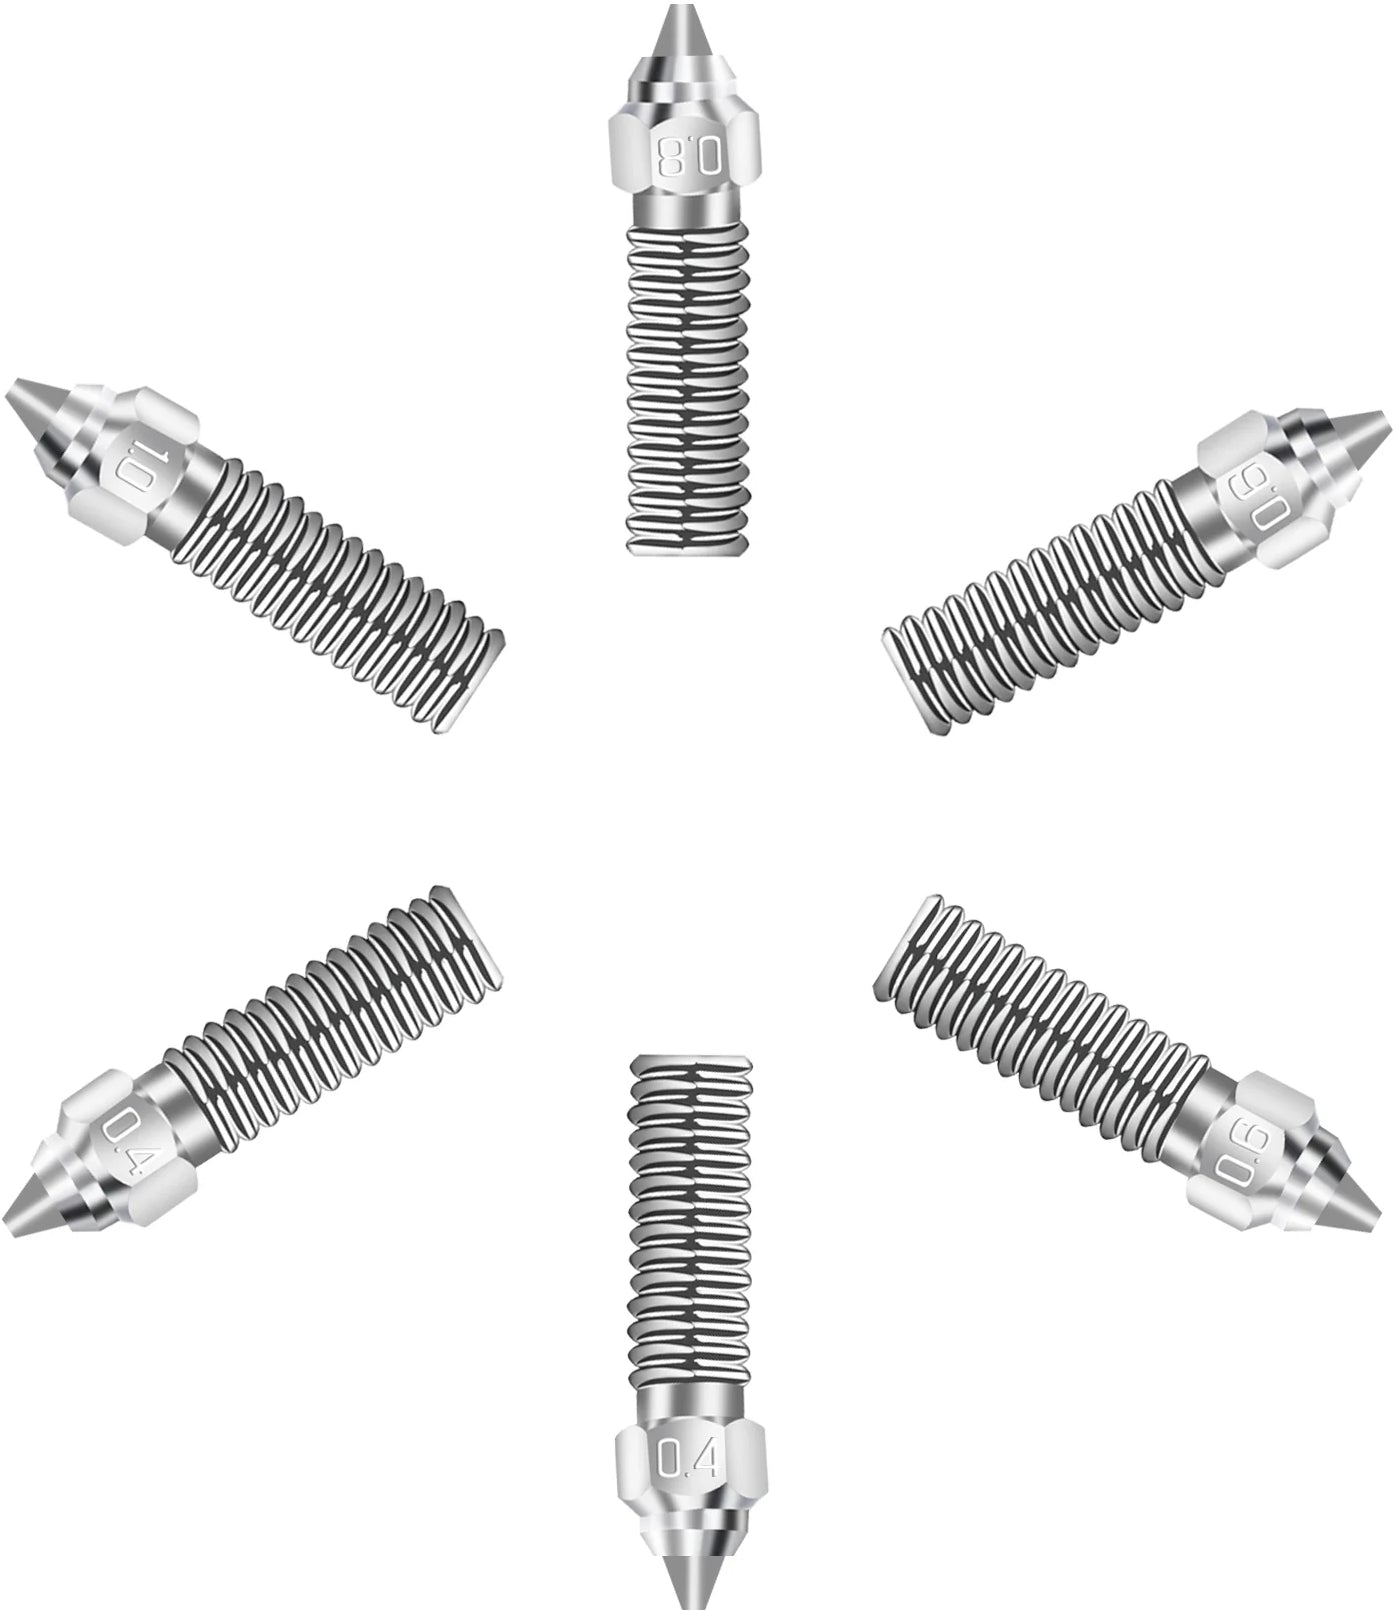 Sovol Hardened Steel Nozzle for the SV06 Plus/SV07 (6pc)